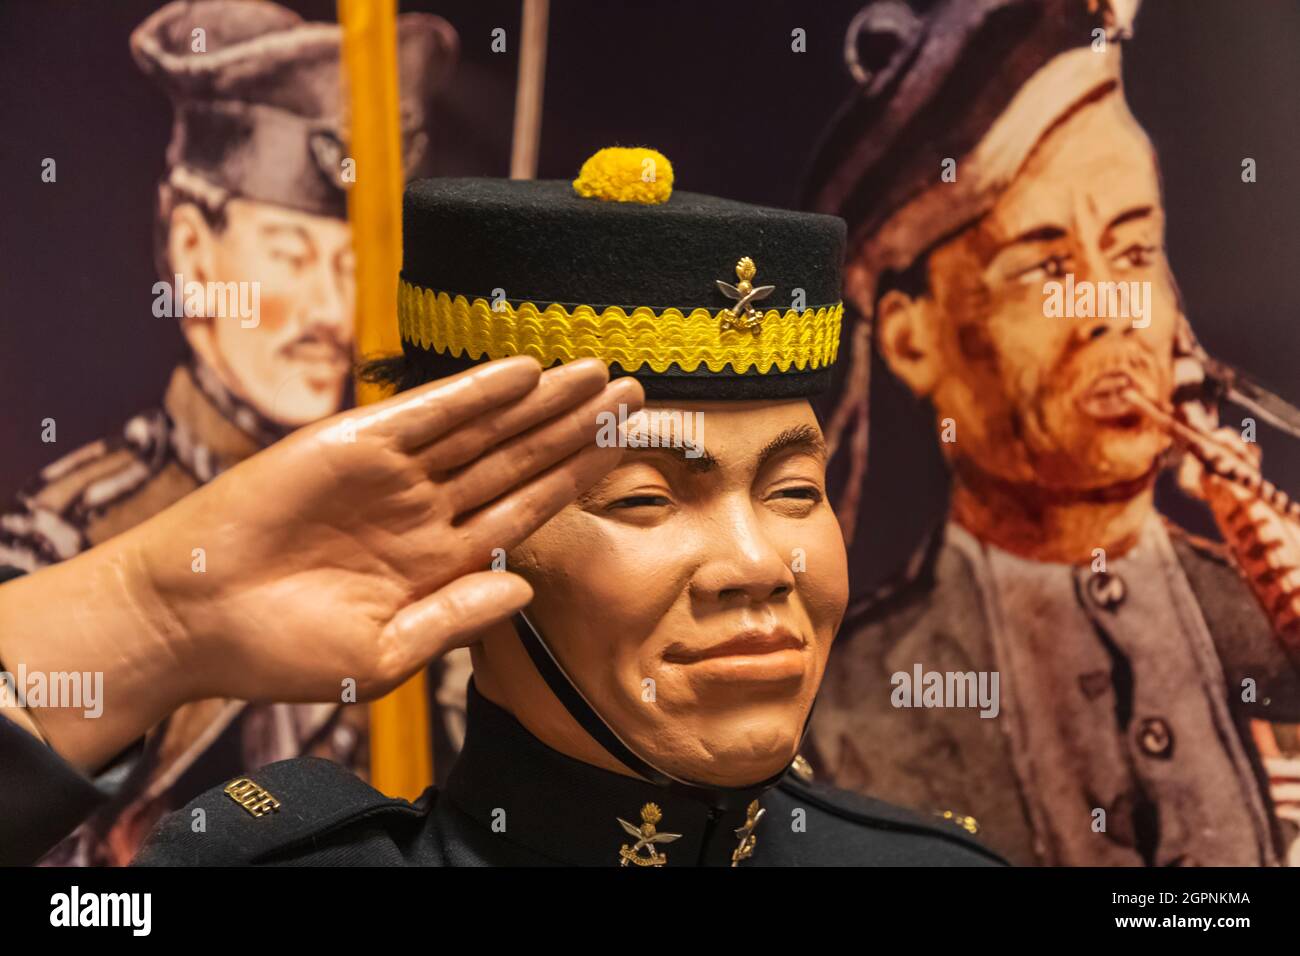 England, Winchester, Winchester's Military Quarter Museums, The Gurkha Museum, Statue of Saluting Gurkha Soldier Stock Photo